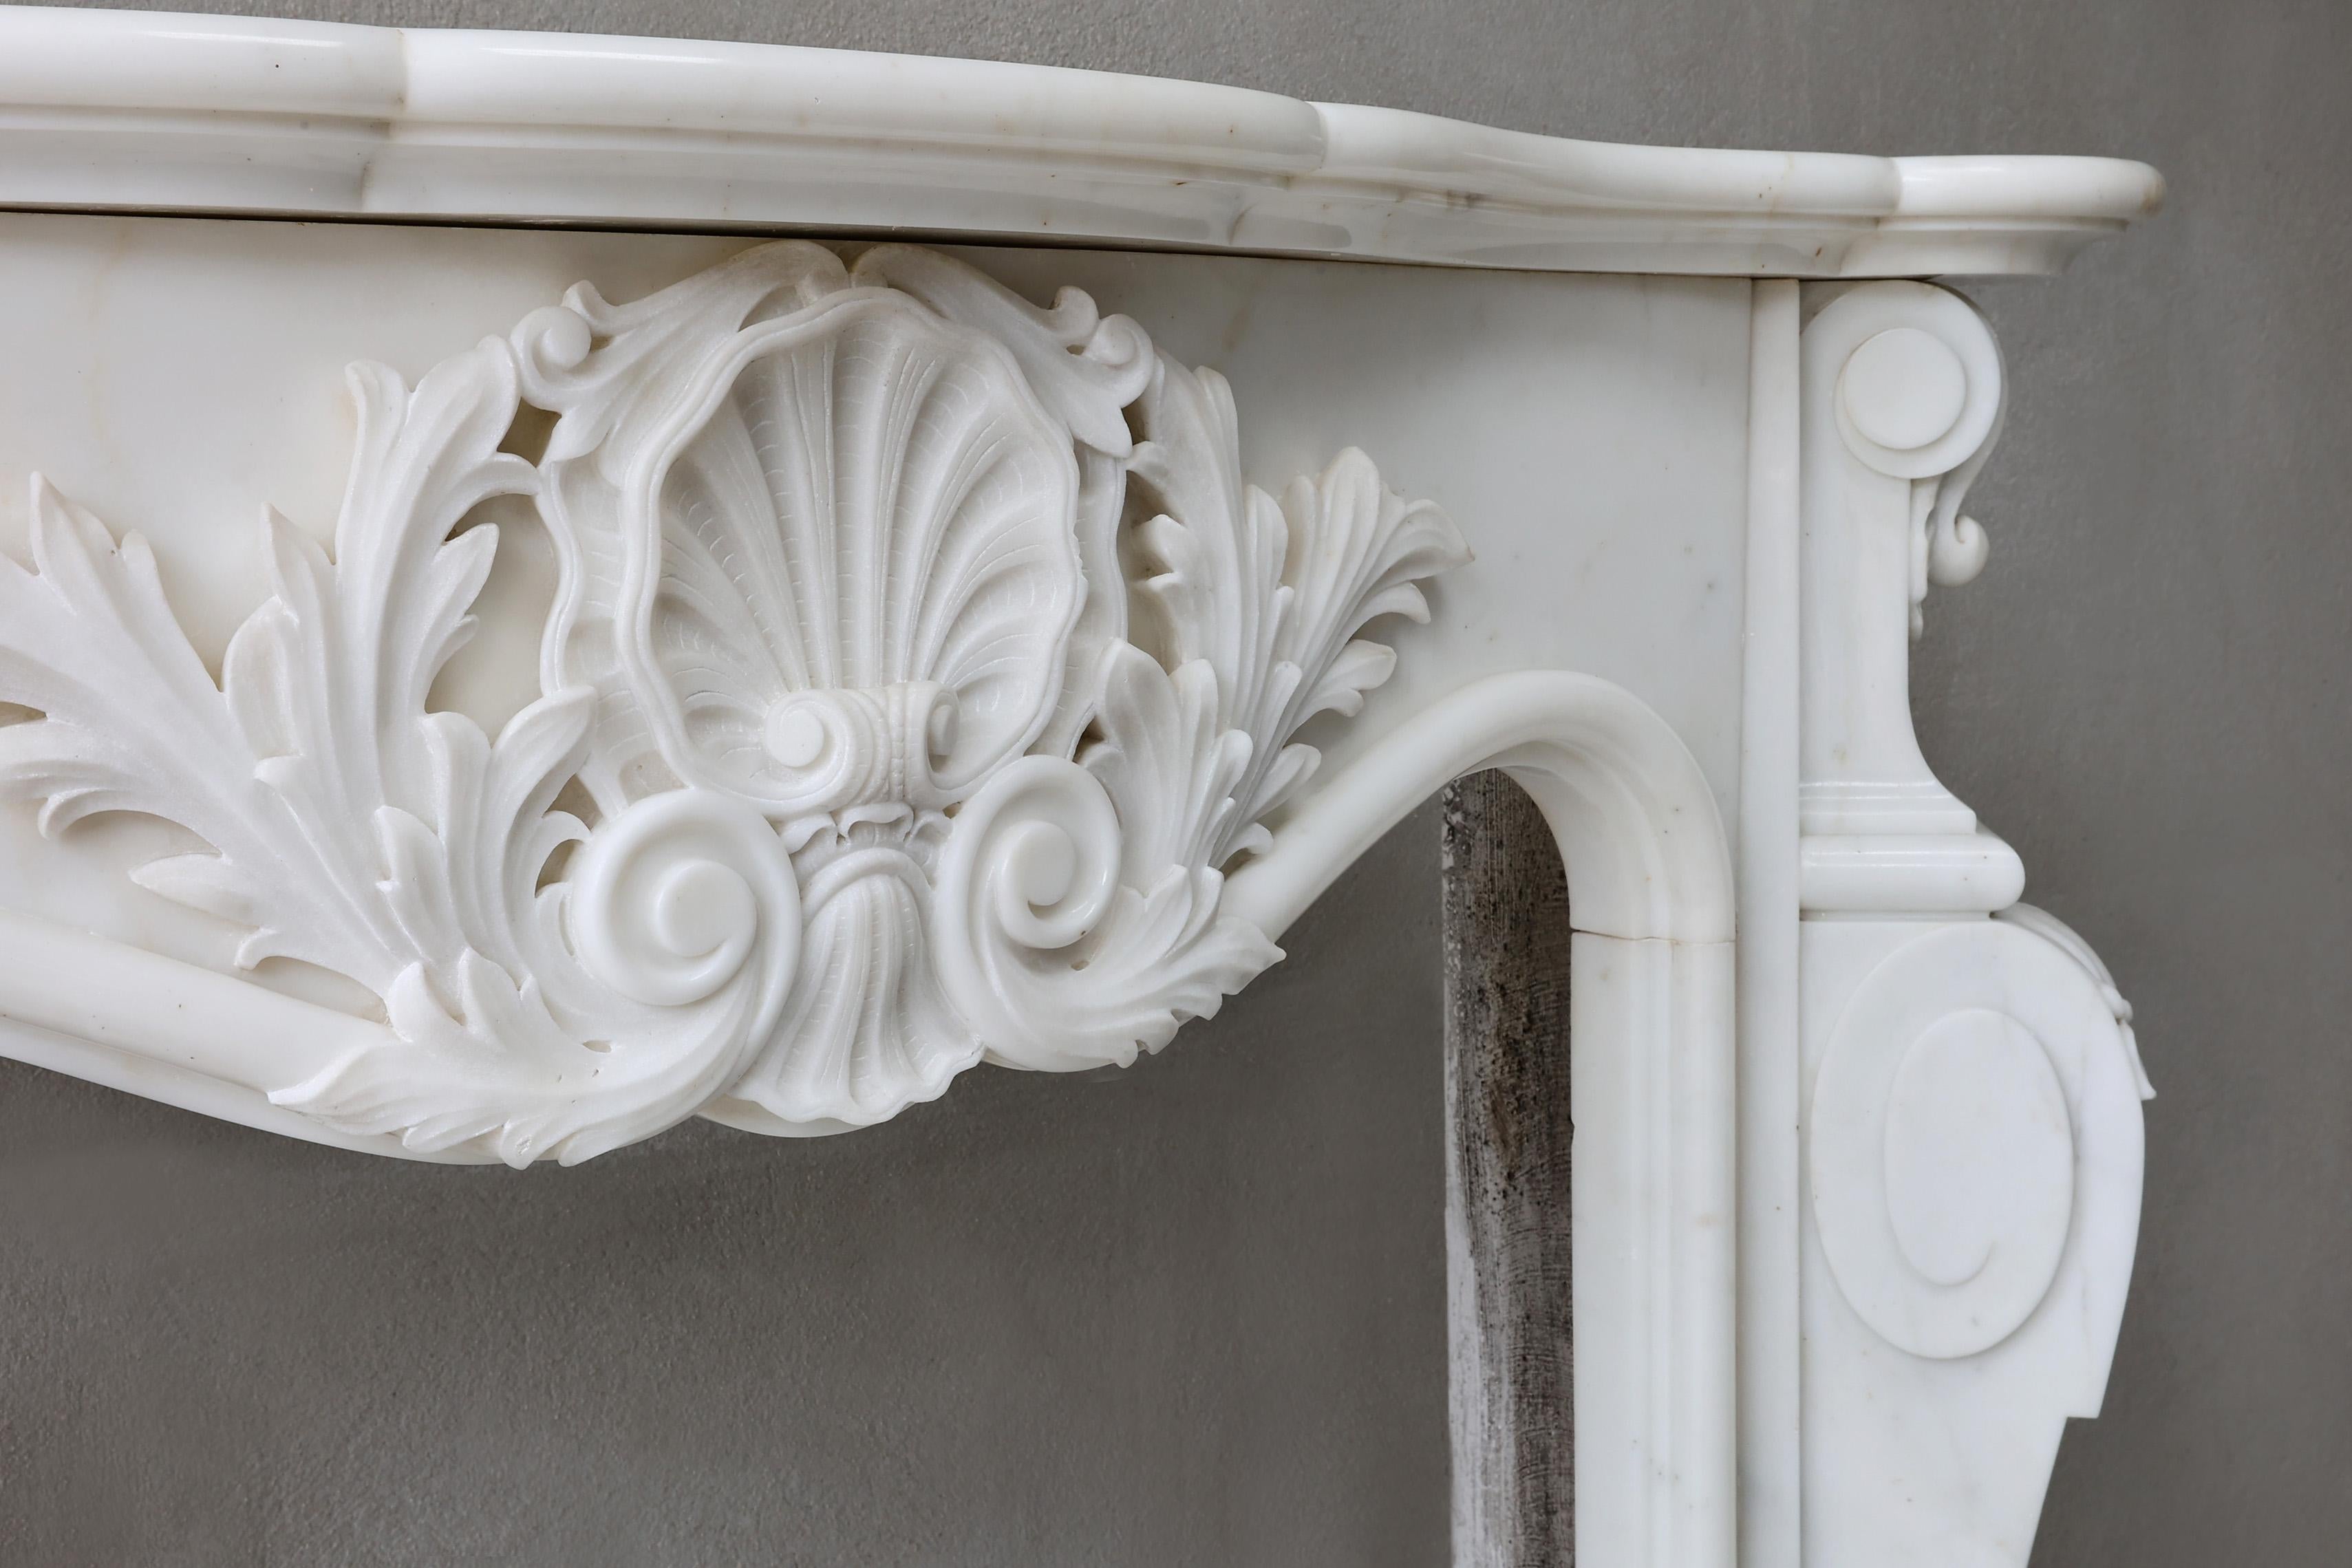 Other Carrara Marble Fireplace in the Style of Louis XV from the 20th Century